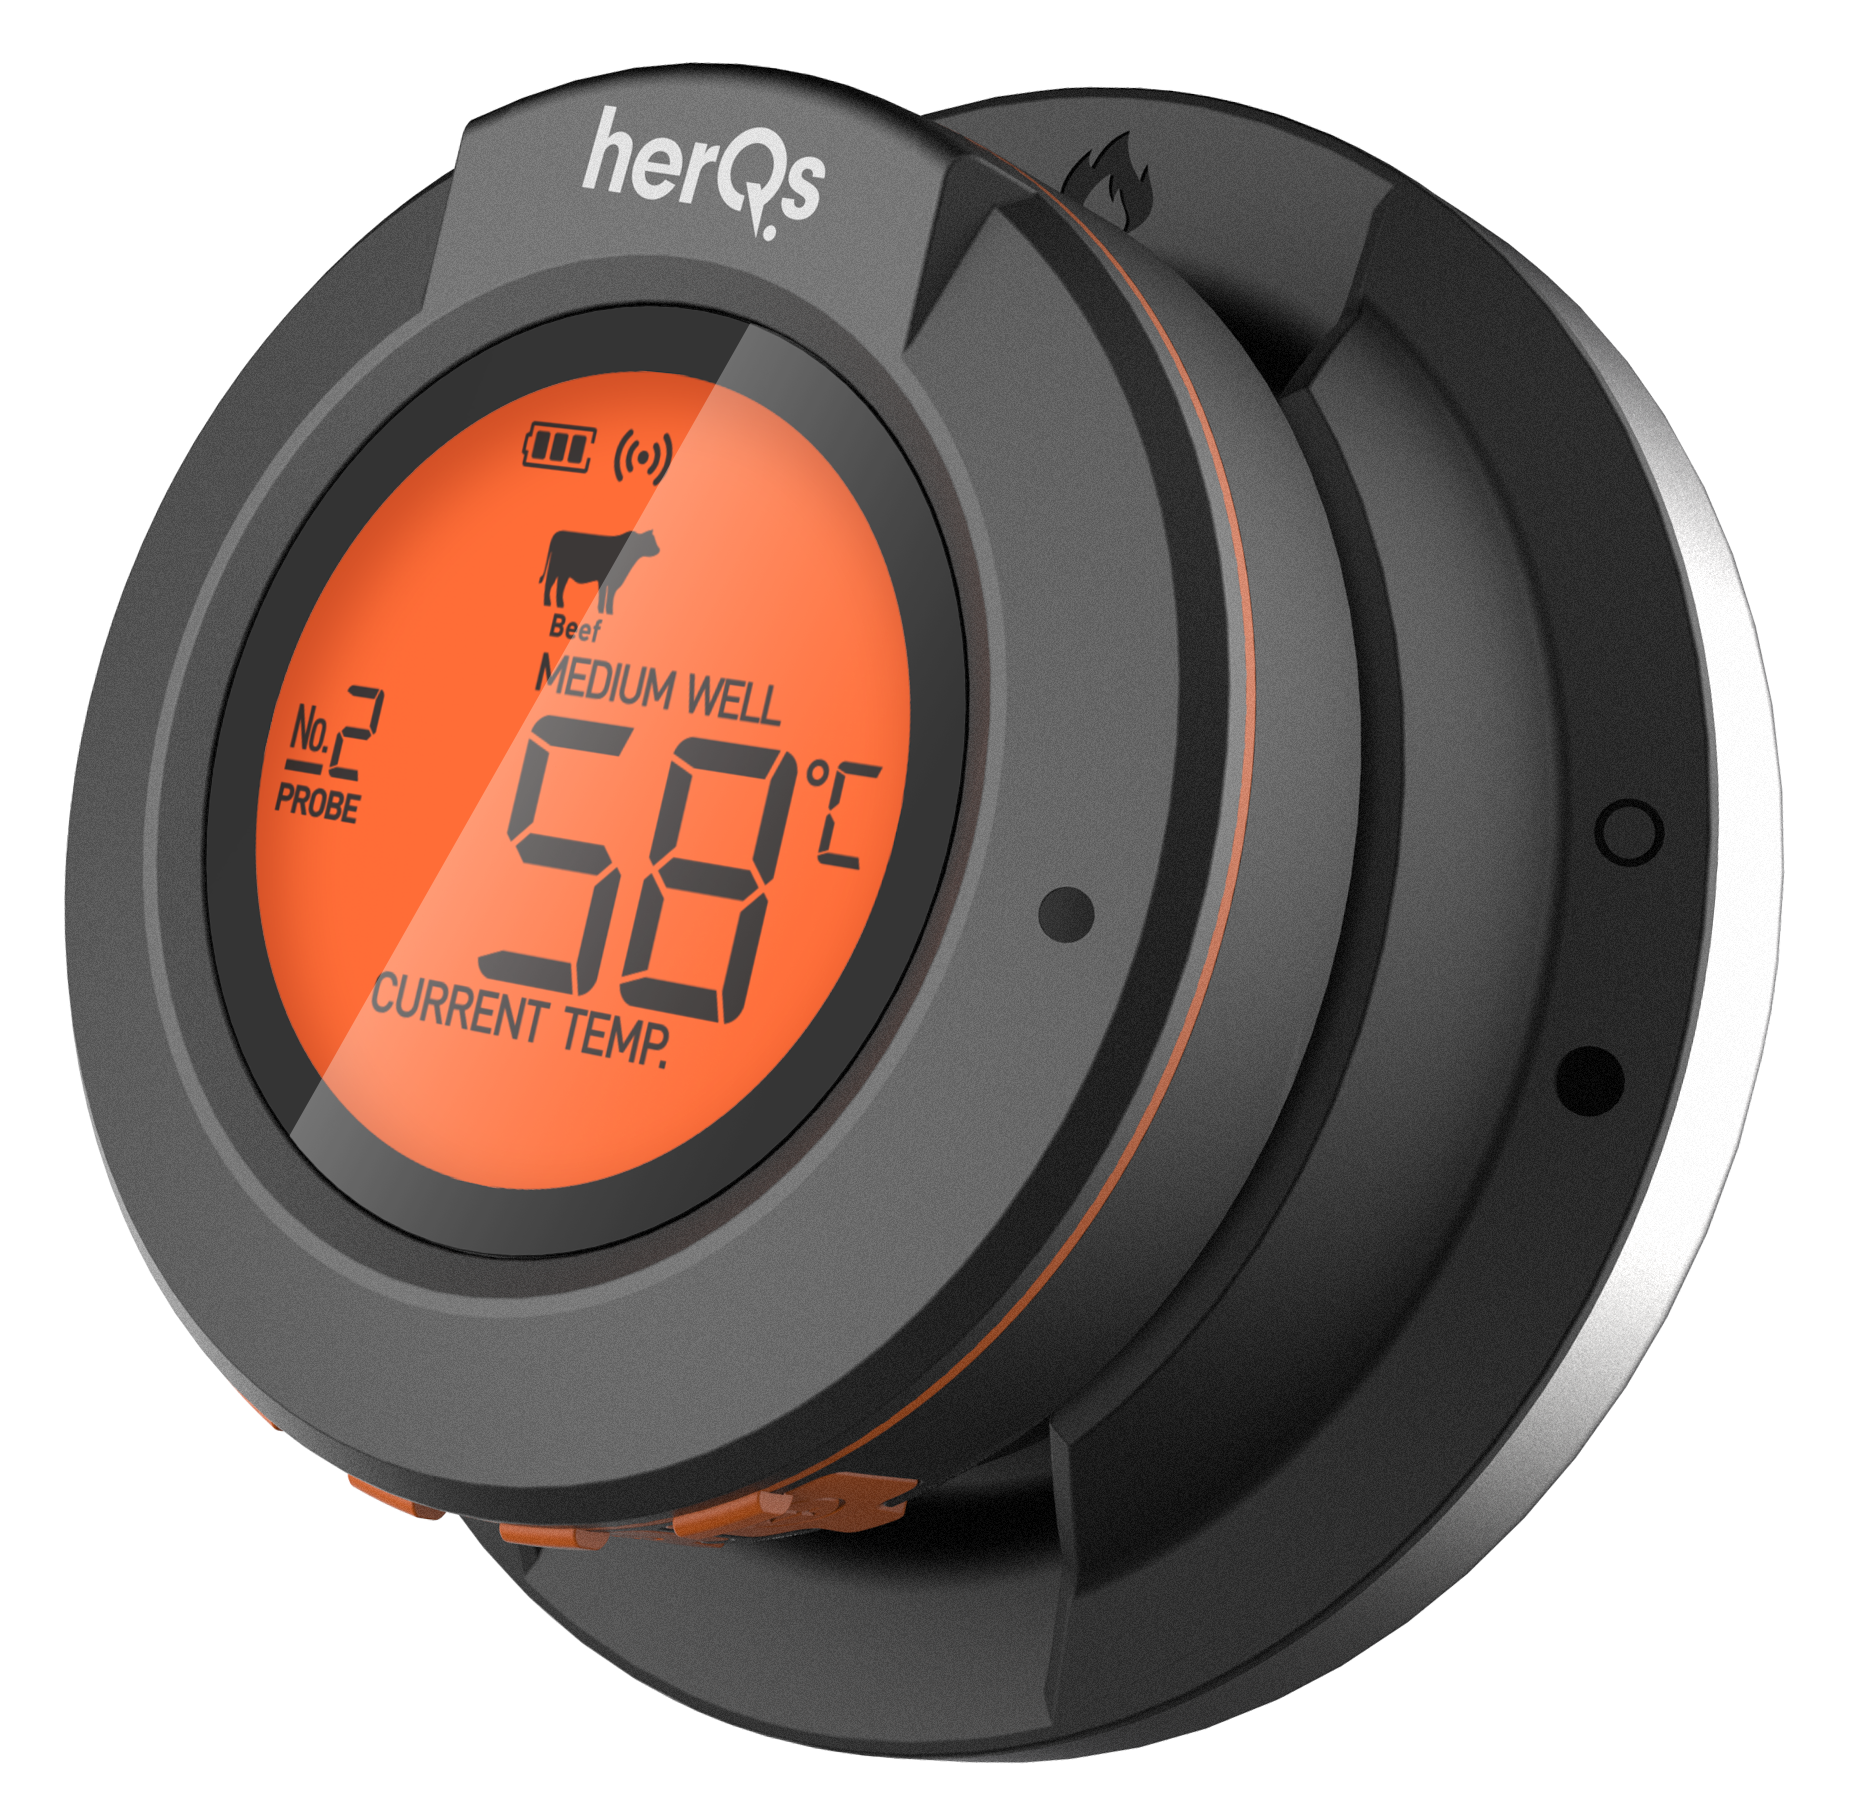 HerQs Connected Digitales Dome Thermometer